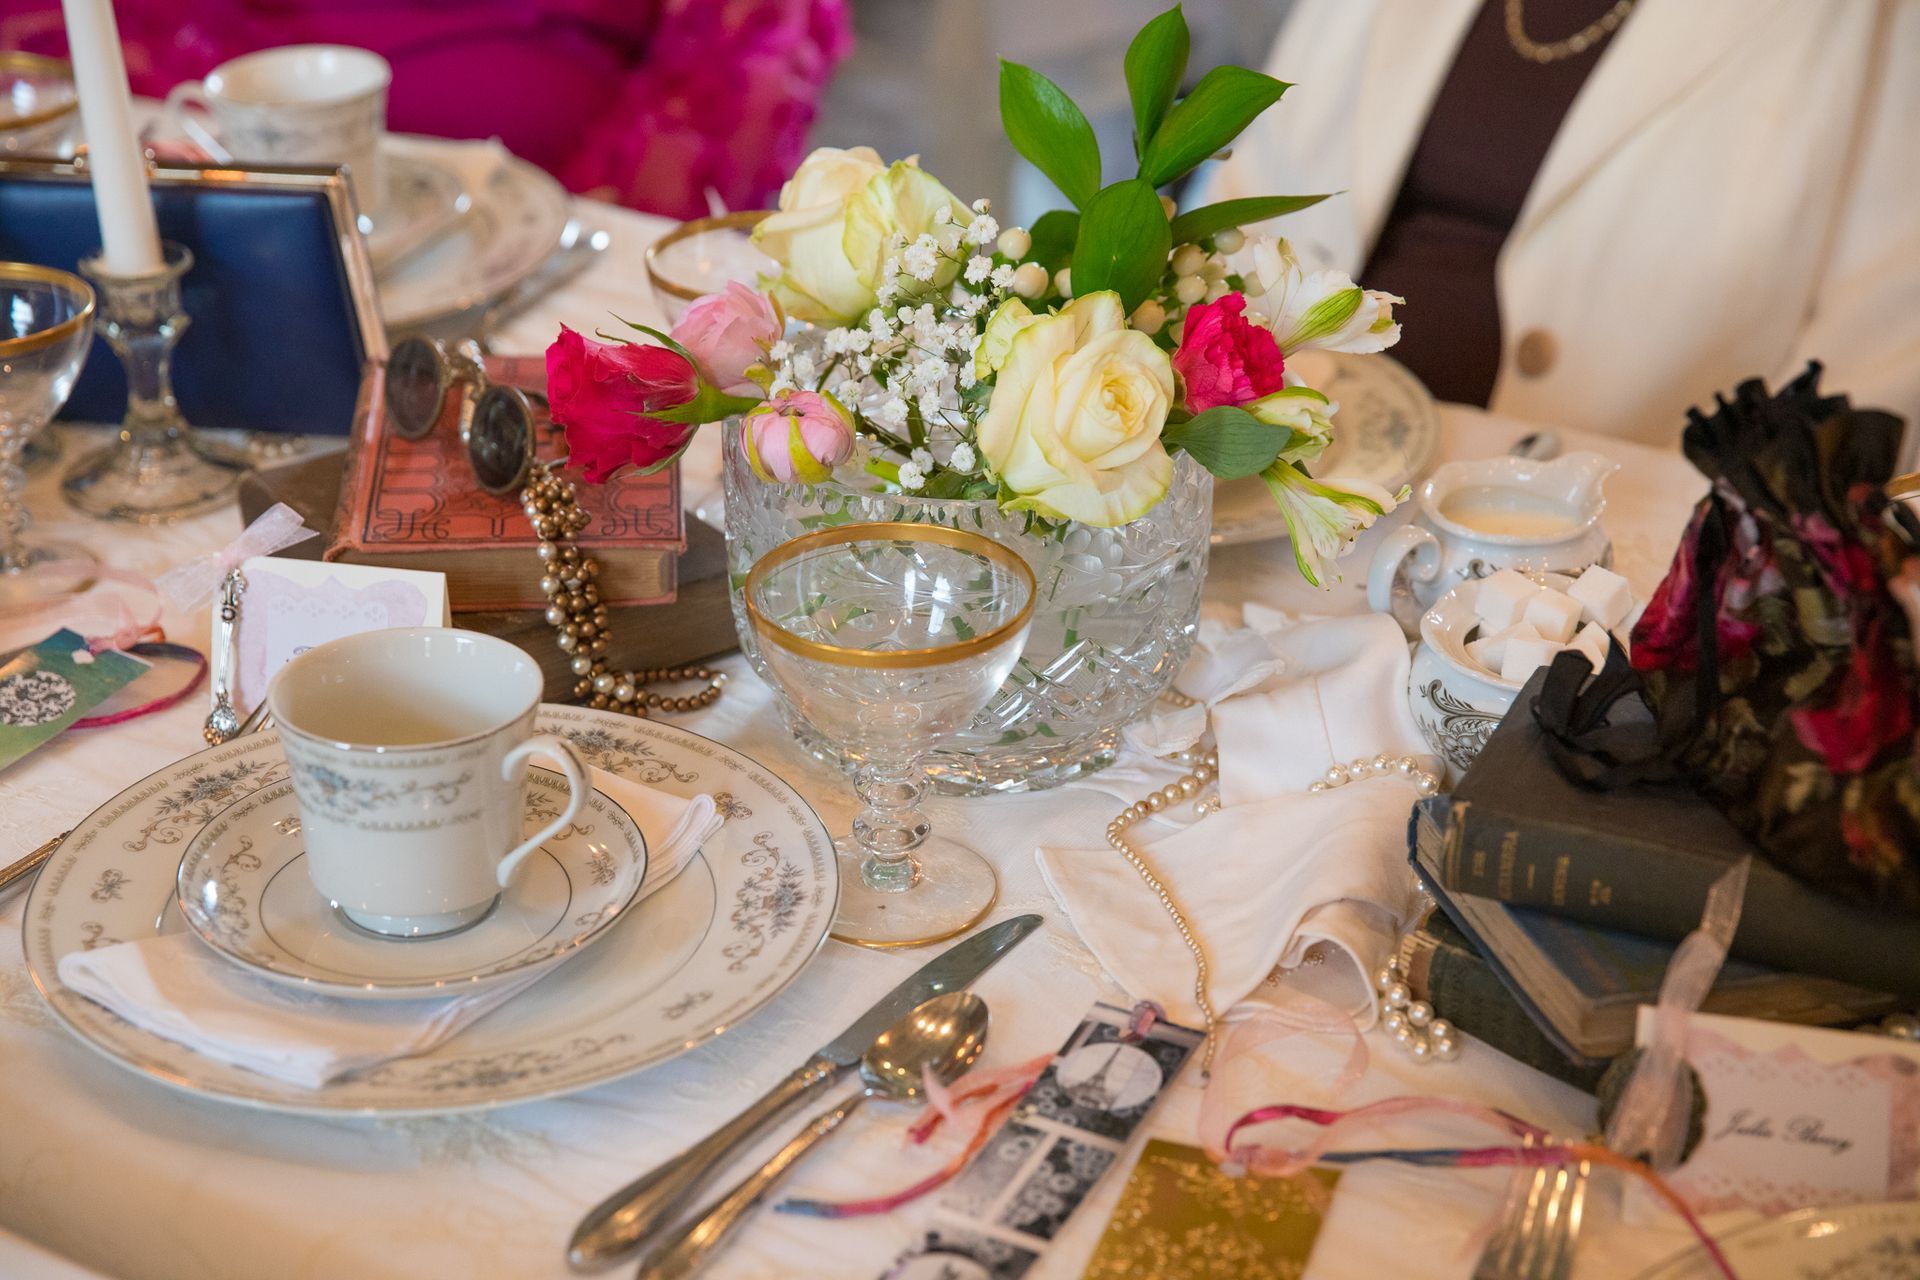 Nostalgic Tablescapes: Decorating with Vintage 